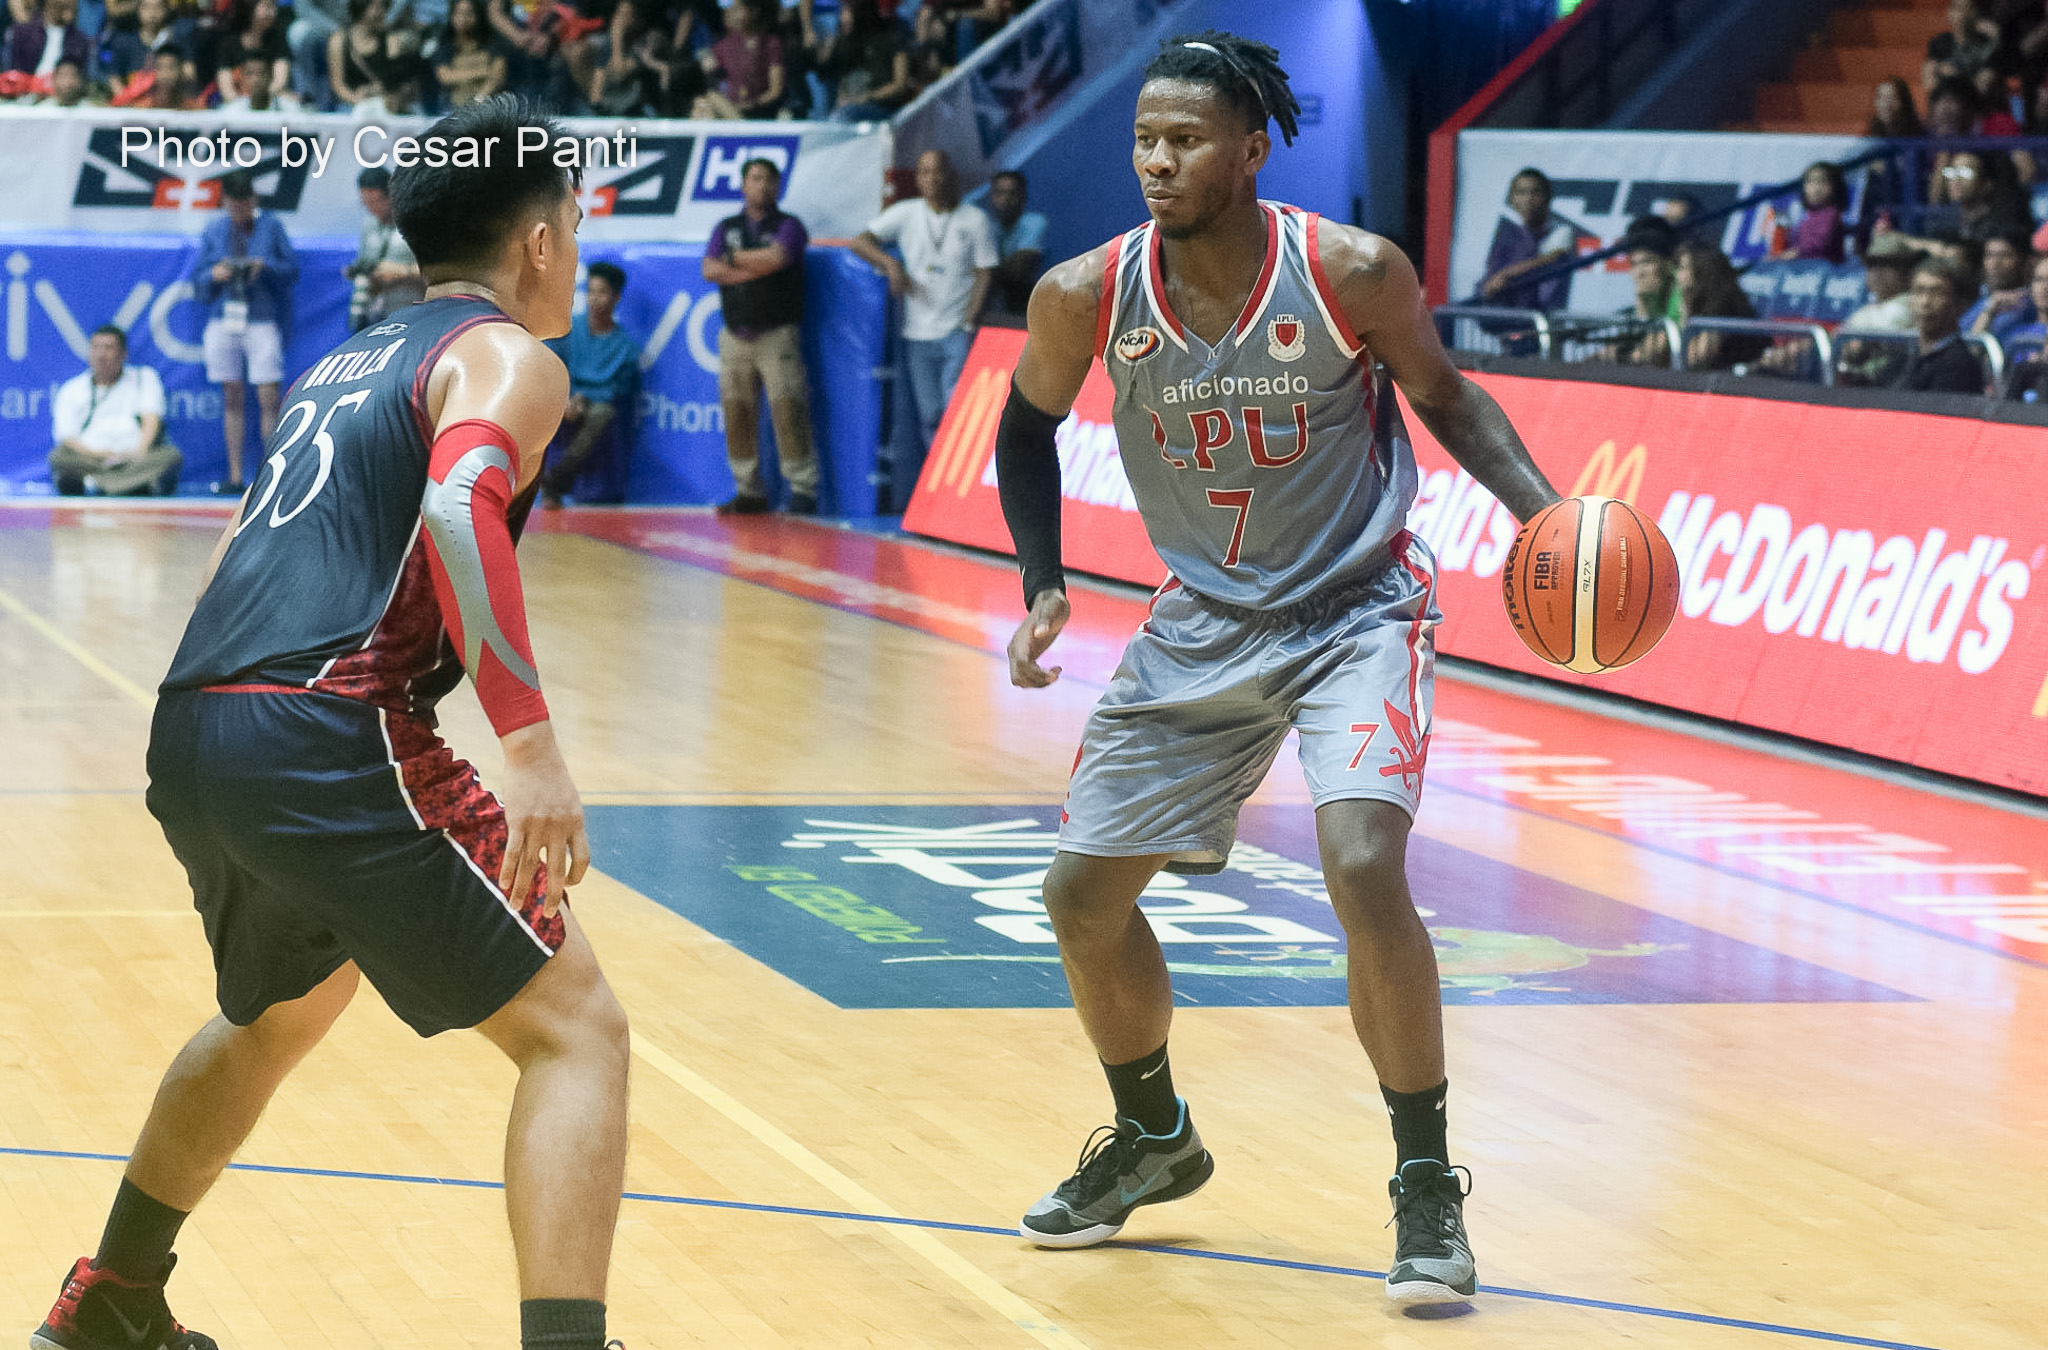 Lyceum edges Letran in thriller to remain undefeated